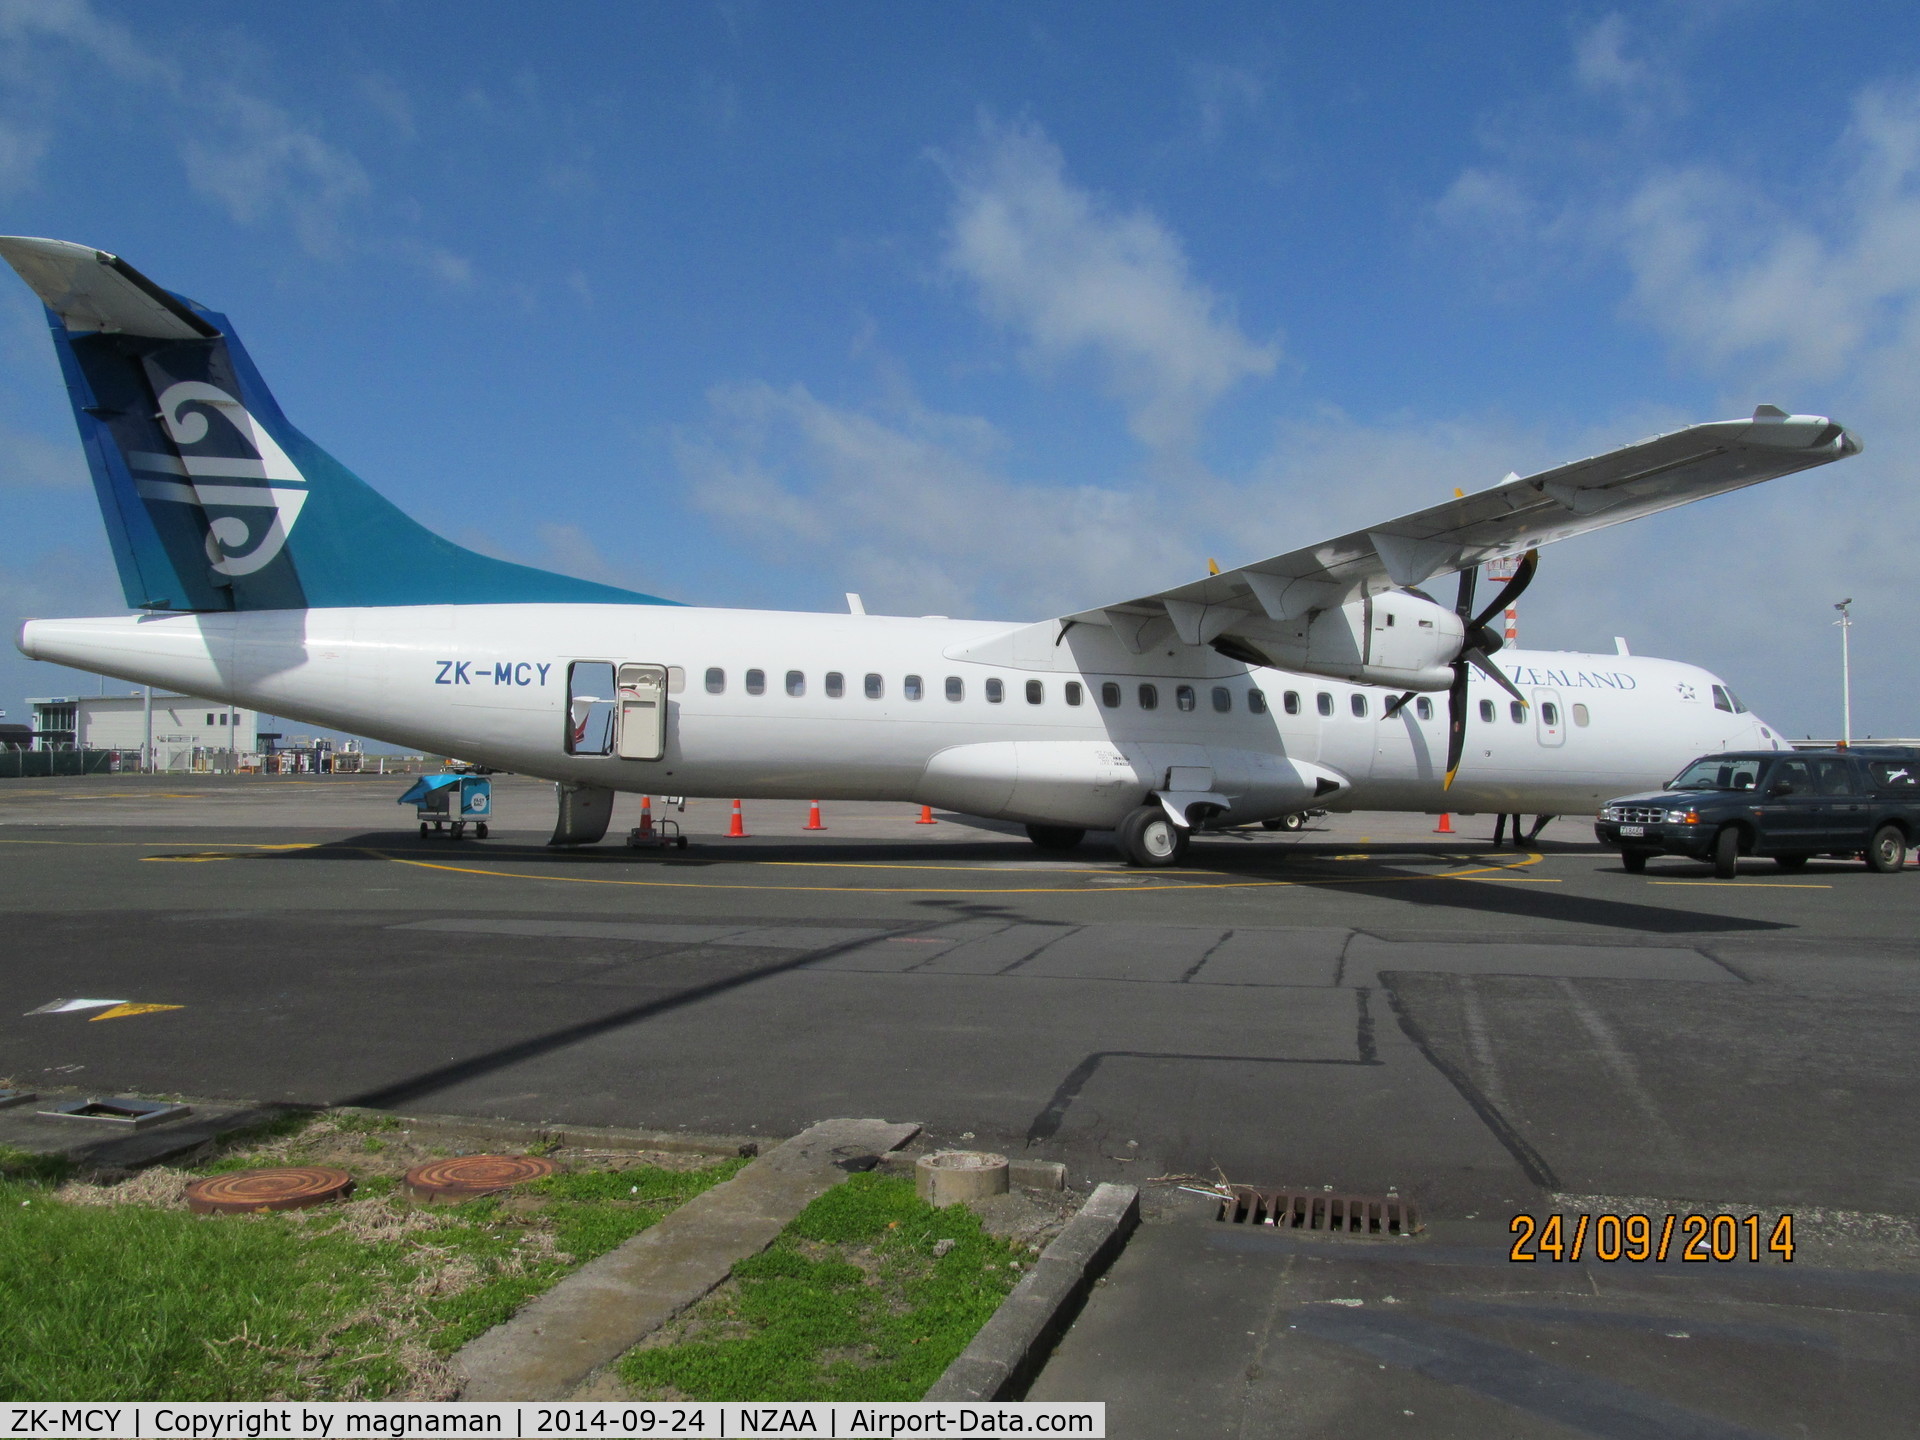 ZK-MCY, 2003 ATR 72-212A C/N 703, still in old c/s